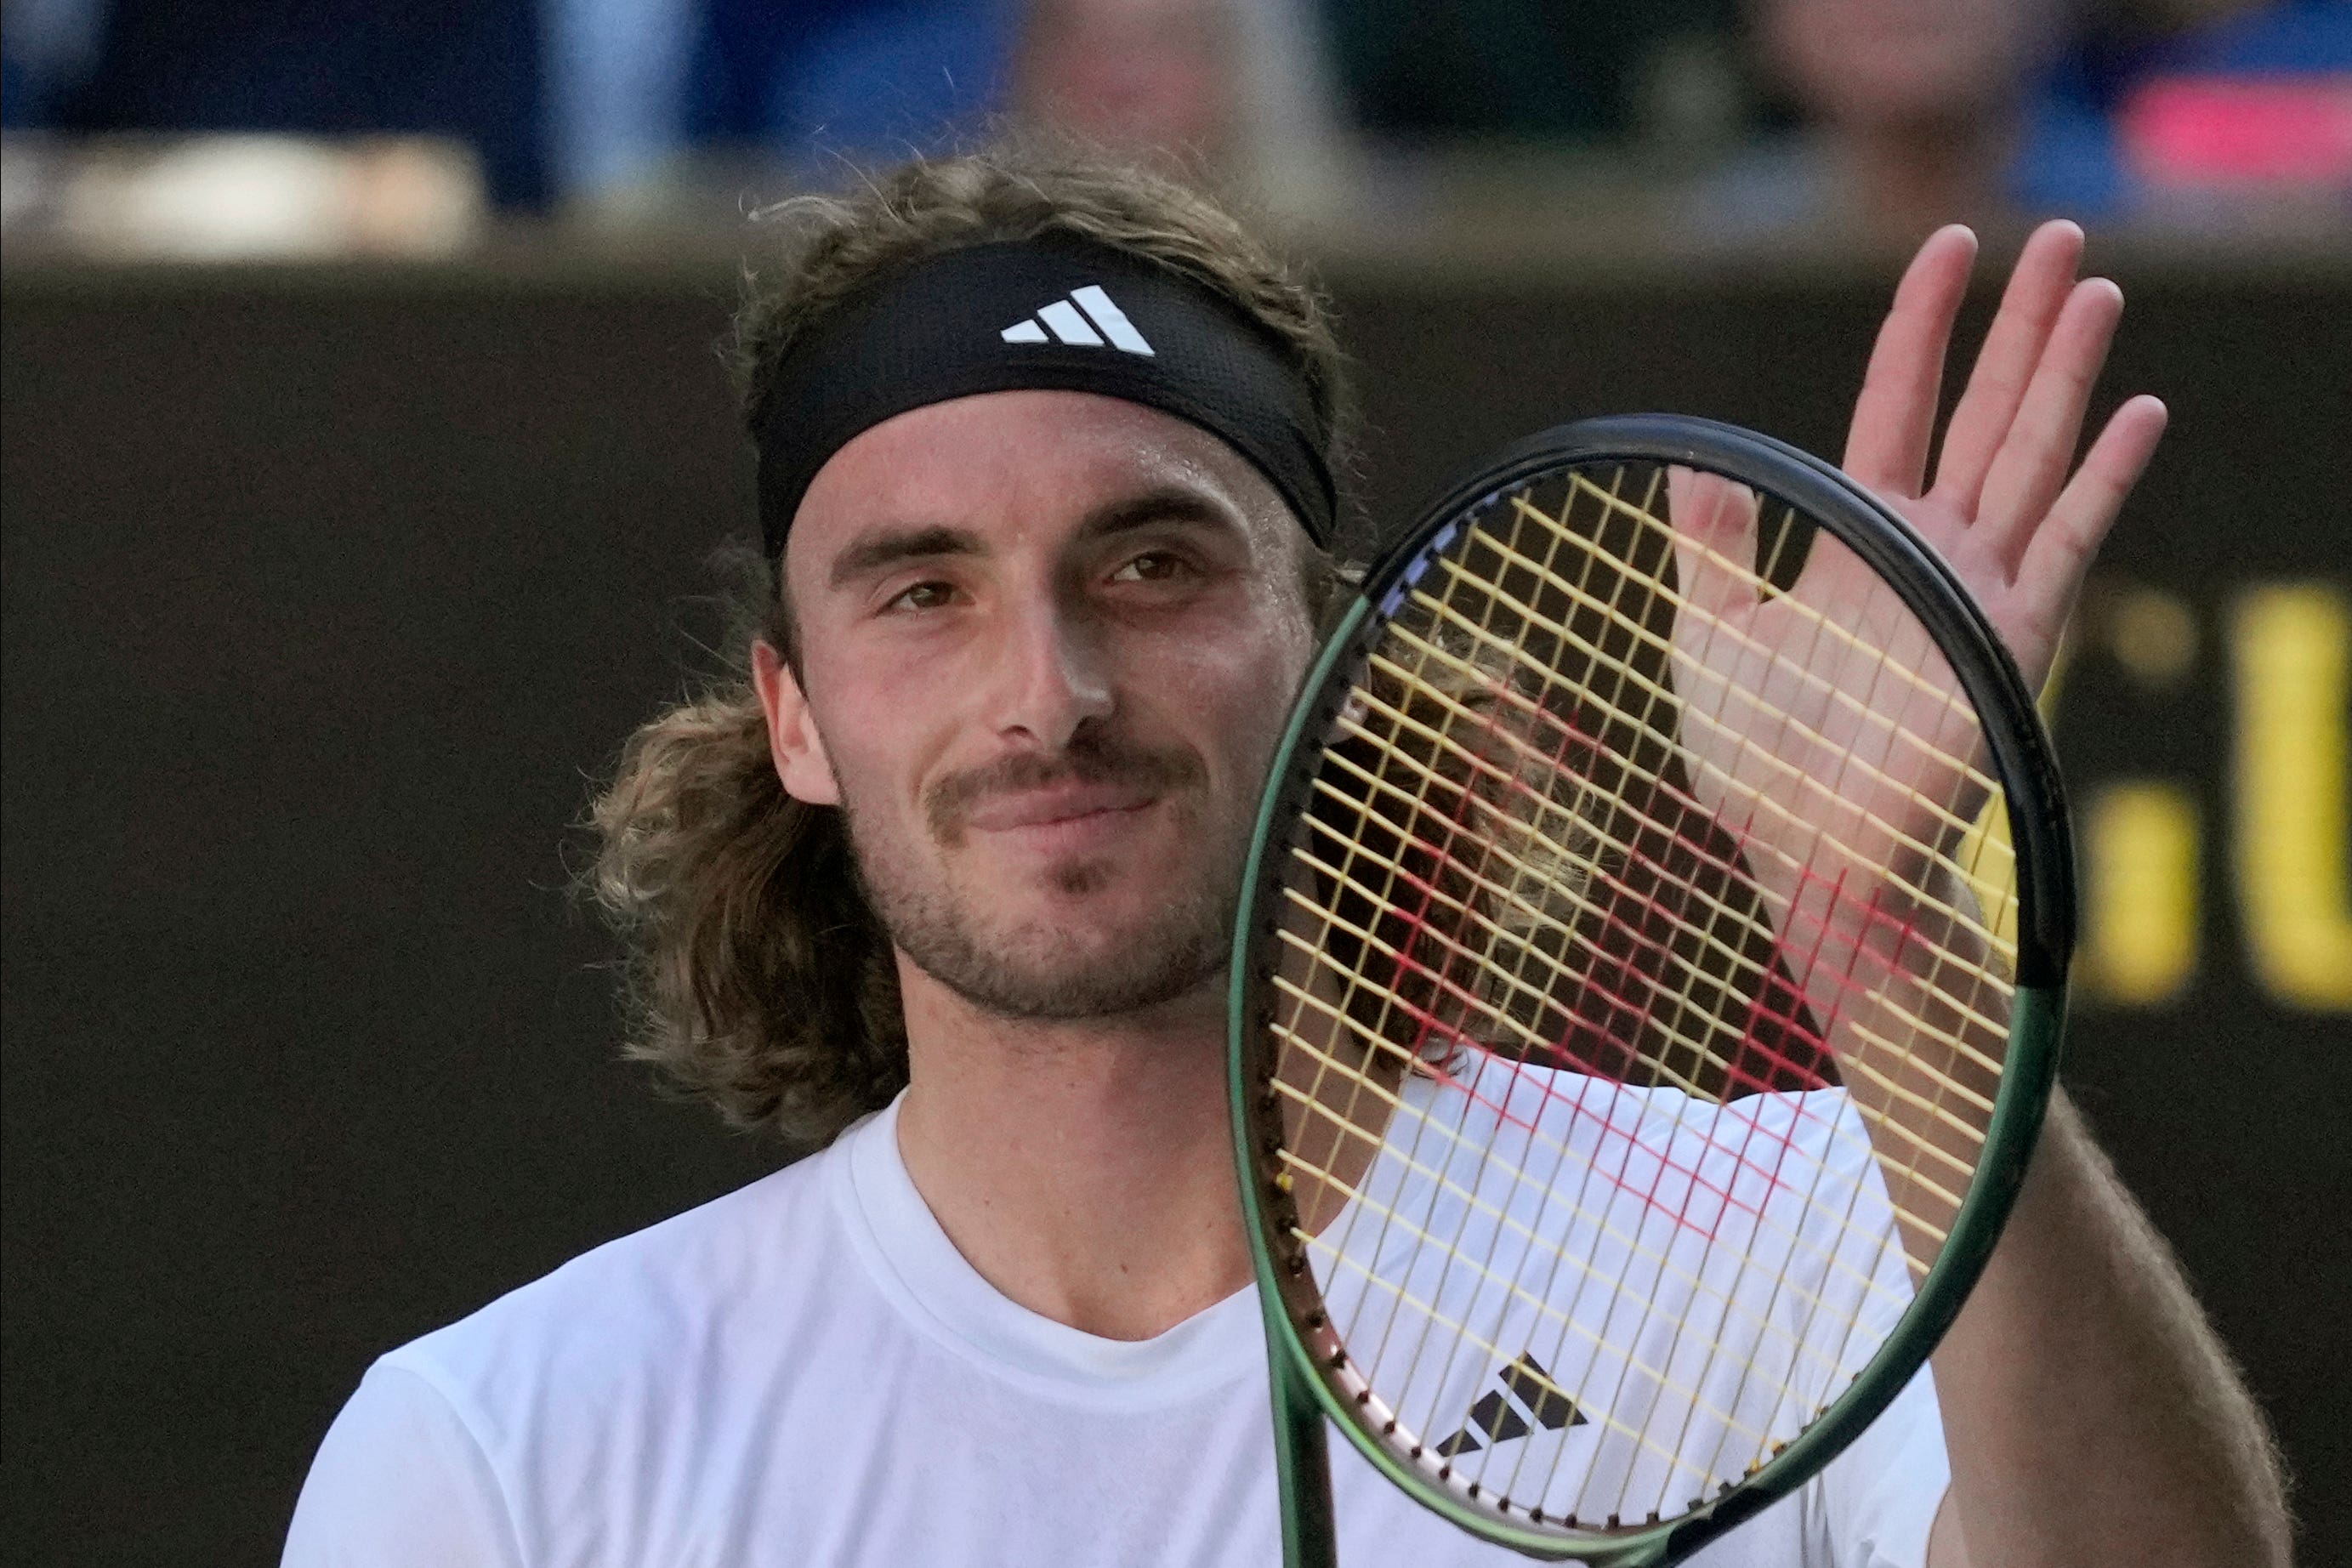 Australian Open 2023 Stefanos Tsitsipas to live dream forged 17 years ago with Novak Djokovic clash The Independent